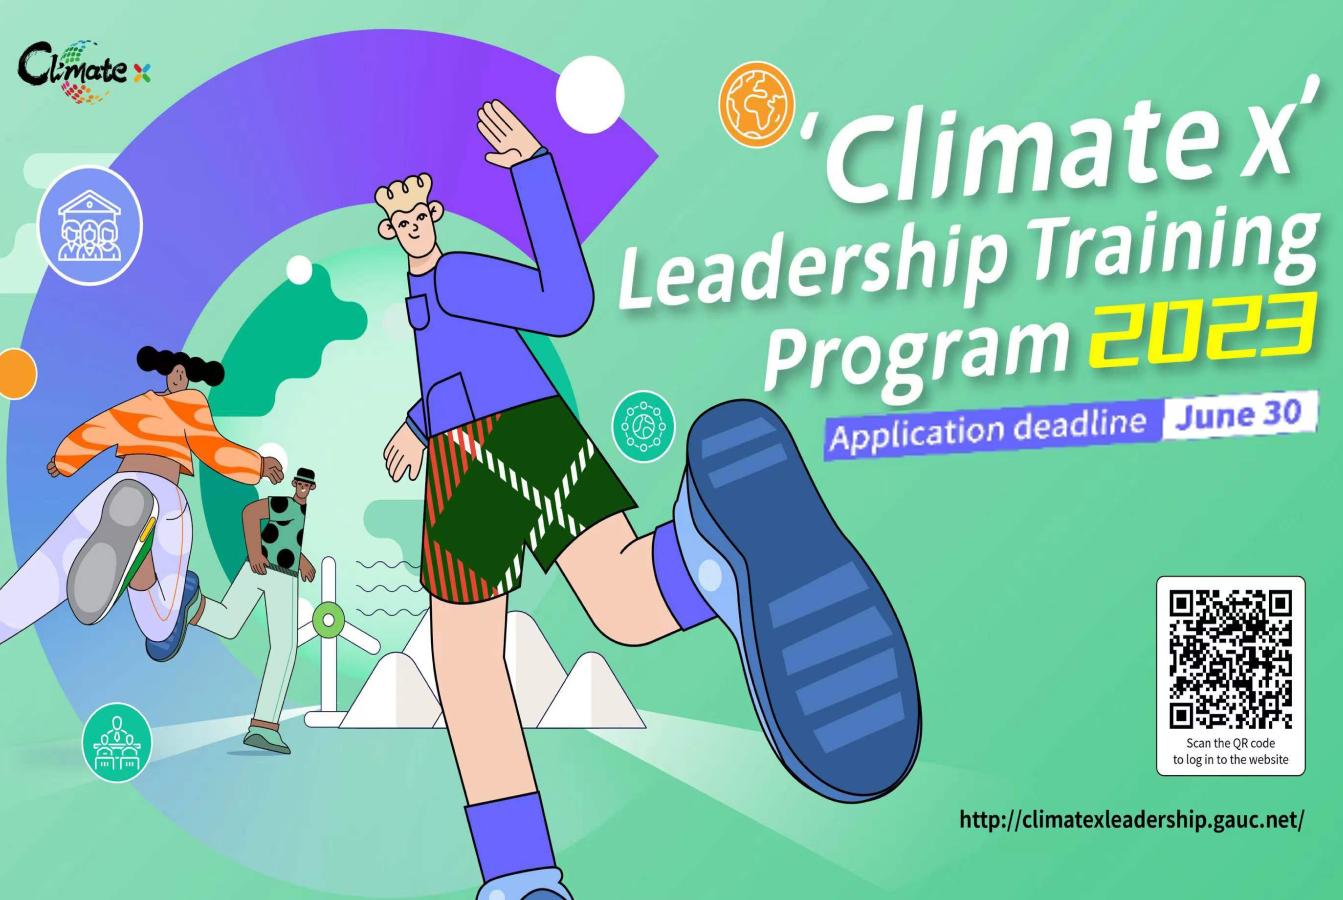 'Climate x' Leadership Training Program Welcomes College Students Worldwide